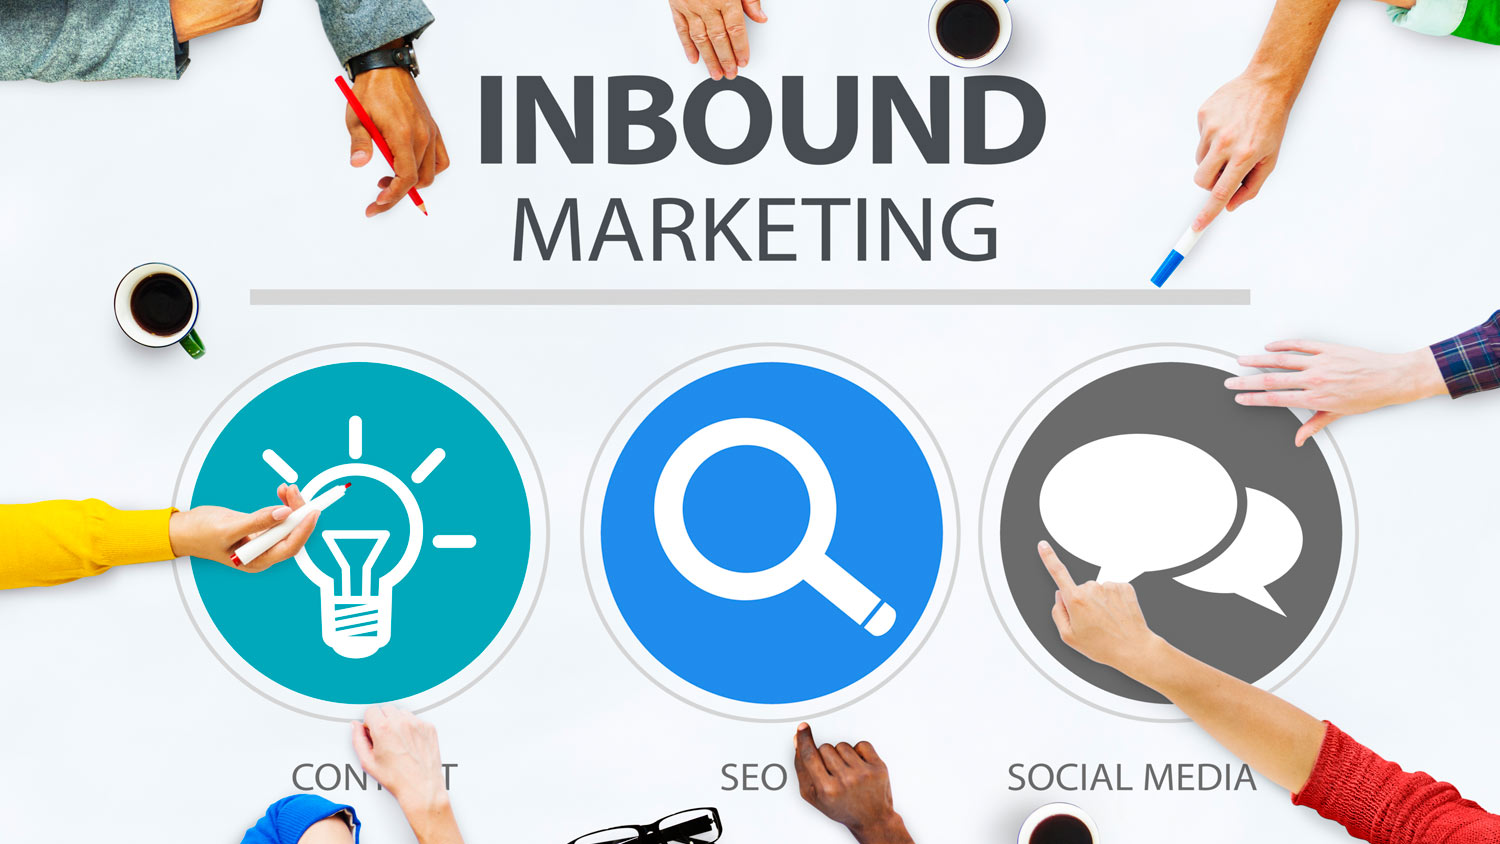 The first and most important thing you need consider while creating a successful inbound marketing plan